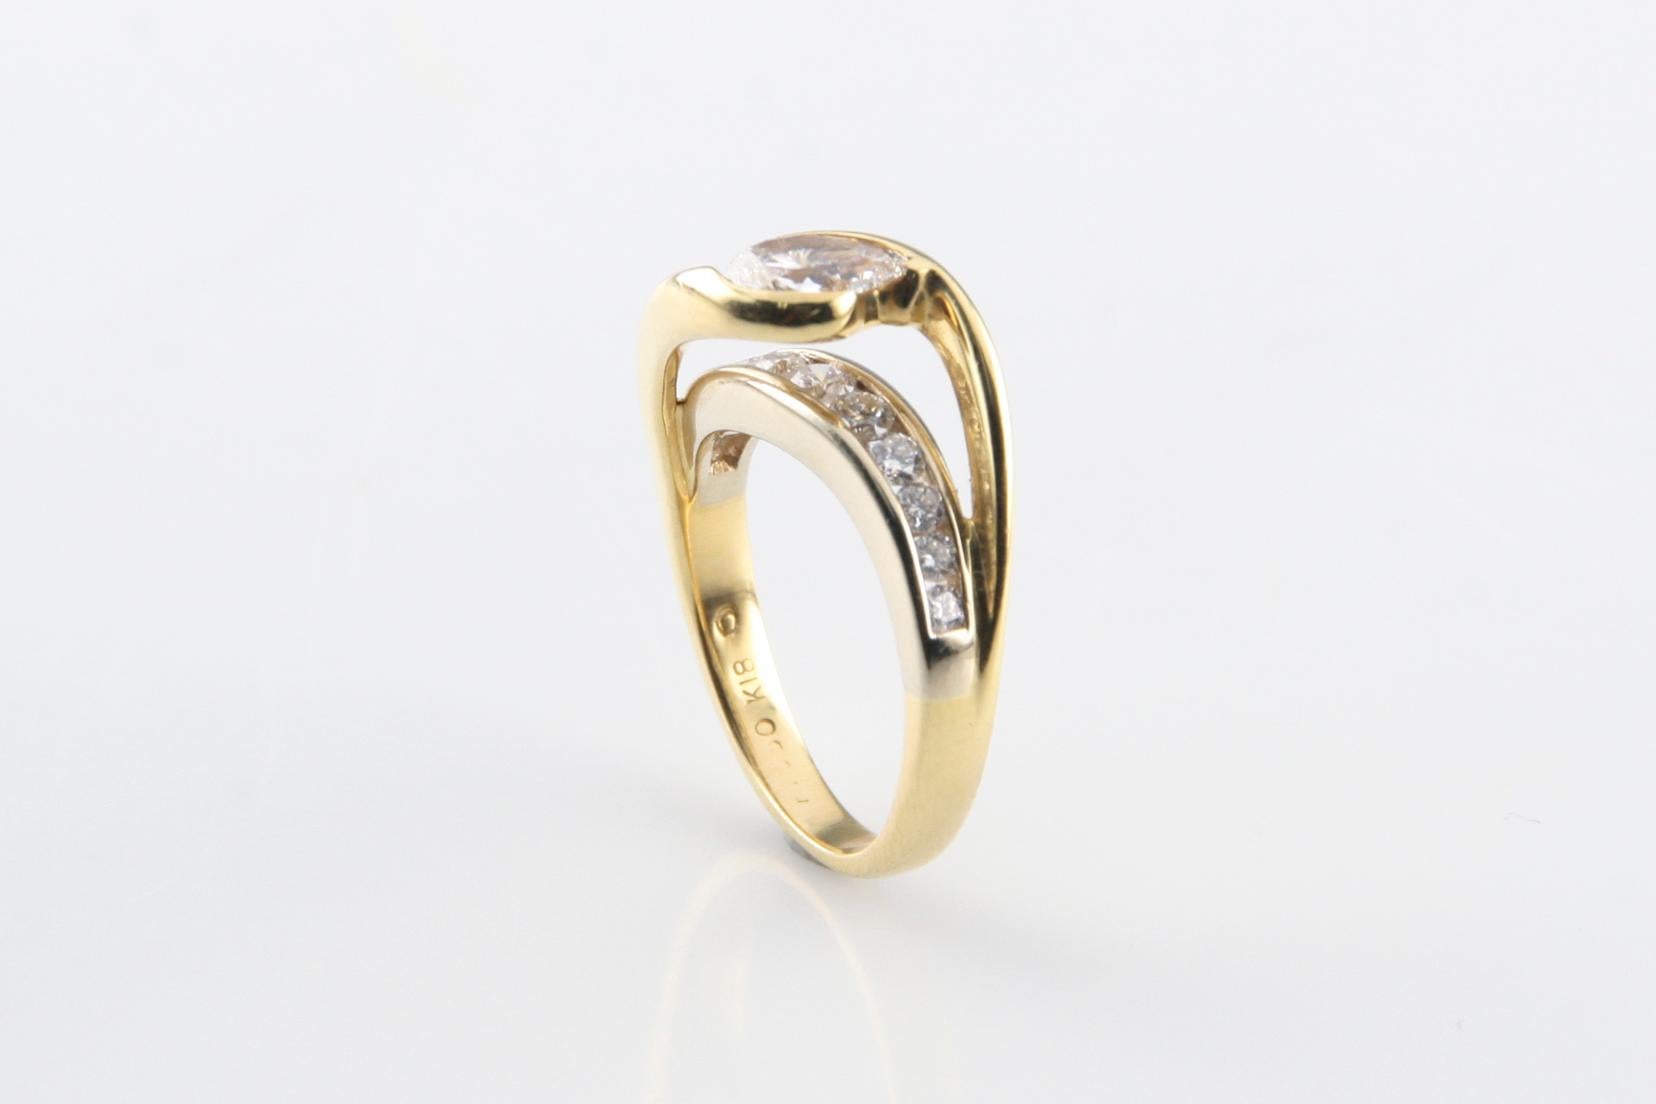 Size 6.25
Bright Finish
Features a Pear Shape Diamond Set Within a Yellow Gold Ribbon Floating Above a Gallery of Round Diamonds, Supported by a 2.5 mm Wide Band
Identified with Markings of 